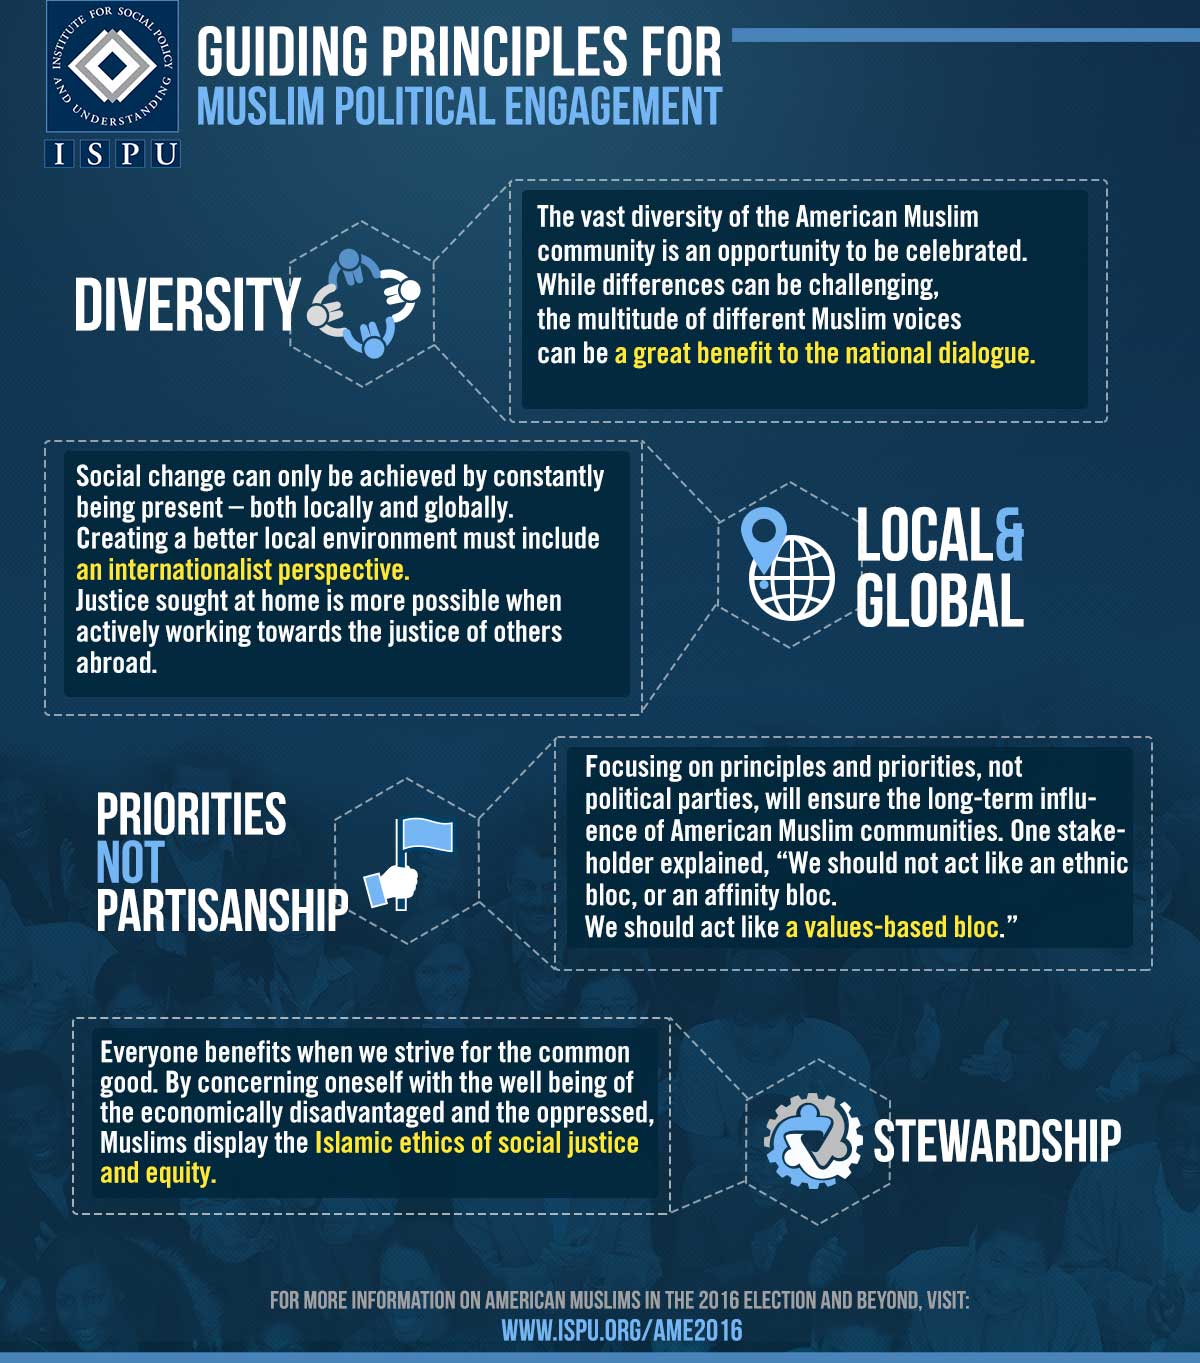 Infographic showing the guiding principles for Muslim Political Engagement. Diversity - While differences can be challenging, the multitude of different Muslim voices can be a great benefit to national dialogue. Local and global - social change can only be achieved by constantly being present, both locally and globally. Priorities not partisanship - Focusing on principles not political parties will ensure the longterm influence of American Muslim communities. Stewardship - By concerning oneself with the well-being of the economically disadvantaged and the oppressed, Muslims display the Islamic ethics of social justice and equity.